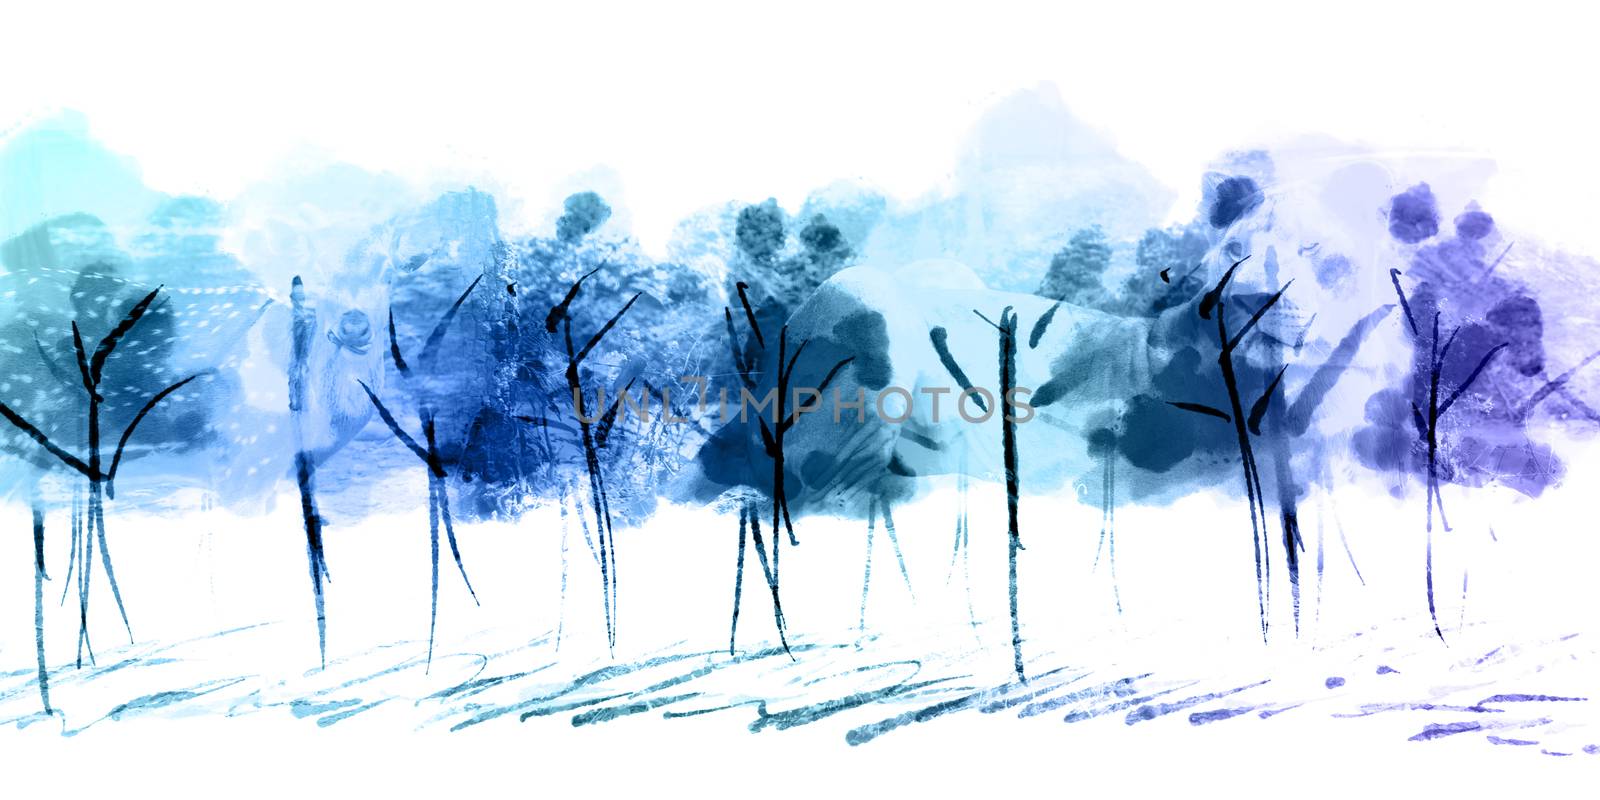 Background image of wild animals reflected on blue tone of paint by pandpstock_002